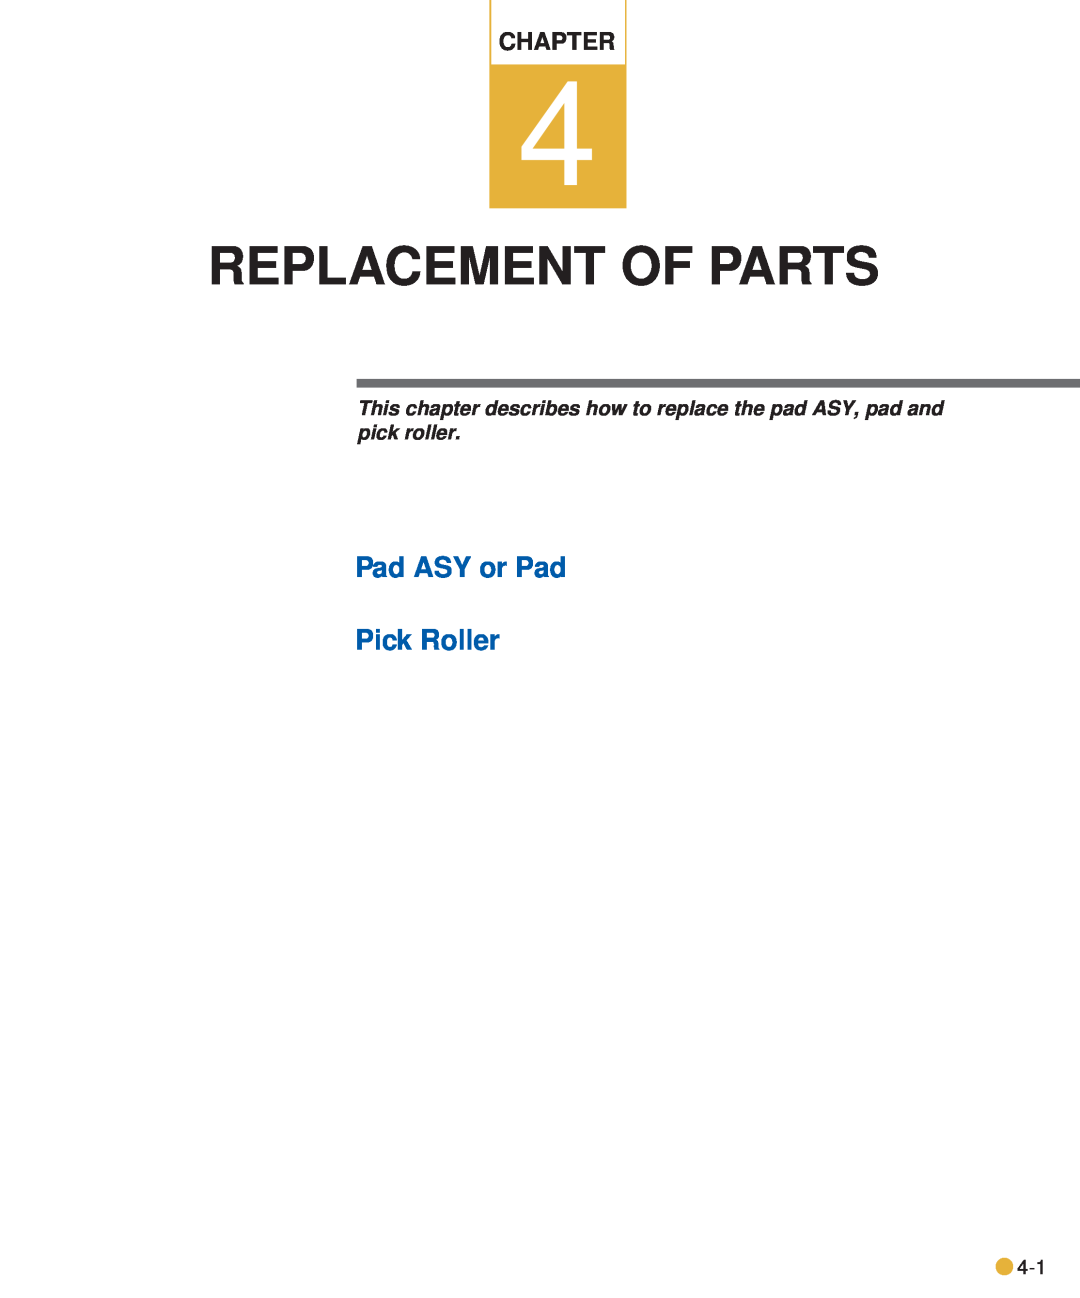 Fujitsu M3093DE/DG manual Replacement Of Parts, Pad ASY or Pad Pick Roller, Chapter 